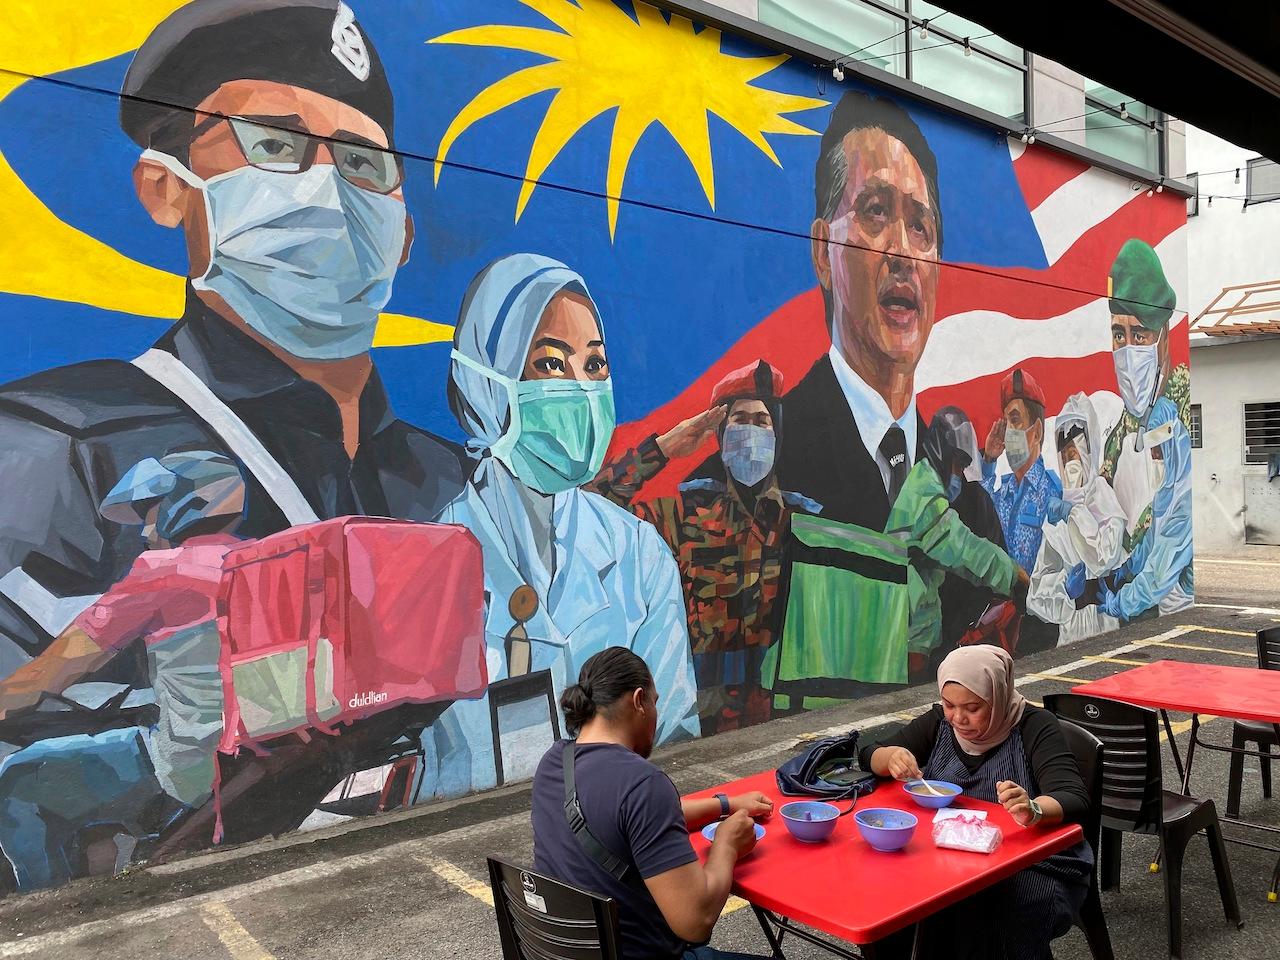 A couple have lunch next to a graffiti tribute to frontline workers at Damansara, Selangor. Photo: AP